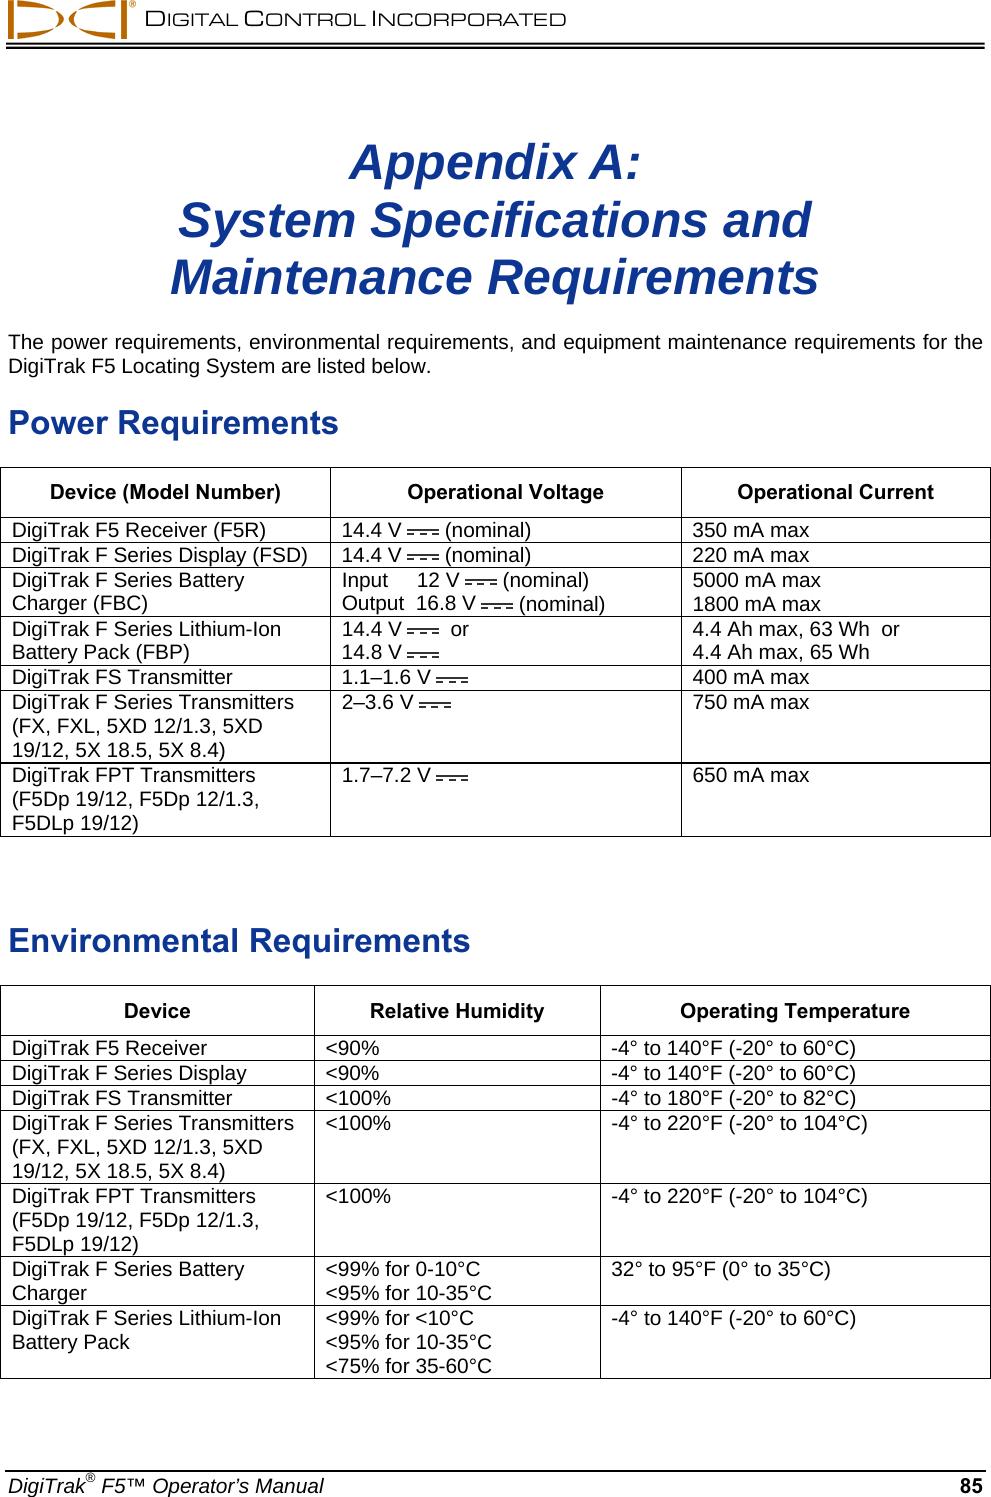  DIGITAL CONTROL INCORPORATED  DigiTrak® F5™ Operator’s Manual 85 Appendix A: System Specifications and Maintenance Requirements  The power requirements, environmental requirements, and equipment maintenance requirements for the DigiTrak F5 Locating System are listed below. Power Requirements Device (Model Number)  Operational Voltage  Operational Current DigiTrak F5 Receiver (F5R)  14.4 V  (nominal)  350 mA max DigiTrak F Series Display (FSD)  14.4 V  (nominal)  220 mA max DigiTrak F Series Battery Charger (FBC)  Input     12 V  (nominal) Output  16.8 V  (nominal)  5000 mA max 1800 mA max  DigiTrak F Series Lithium-Ion Battery Pack (FBP)  14.4 V   or  14.8 V  4.4 Ah max, 63 Wh  or  4.4 Ah max, 65 Wh  DigiTrak FS Transmitter  1.1–1.6 V   400 mA max DigiTrak F Series Transmitters (FX, FXL, 5XD 12/1.3, 5XD 19/12, 5X 18.5, 5X 8.4)  2–3.6 V   750 mA max DigiTrak FPT Transmitters (F5Dp 19/12, F5Dp 12/1.3, F5DLp 19/12) 1.7–7.2 V   650 mA max   Environmental Requirements Device  Relative Humidity  Operating Temperature DigiTrak F5 Receiver  &lt;90%  -4° to 140°F (-20° to 60°C) DigiTrak F Series Display  &lt;90%  -4° to 140°F (-20° to 60°C) DigiTrak FS Transmitter  &lt;100%  -4° to 180°F (-20° to 82°C) DigiTrak F Series Transmitters (FX, FXL, 5XD 12/1.3, 5XD 19/12, 5X 18.5, 5X 8.4) &lt;100%  -4° to 220°F (-20° to 104°C) DigiTrak FPT Transmitters (F5Dp 19/12, F5Dp 12/1.3, F5DLp 19/12) &lt;100%  -4° to 220°F (-20° to 104°C) DigiTrak F Series Battery Charger  &lt;99% for 0-10°C &lt;95% for 10-35°C  32° to 95°F (0° to 35°C) DigiTrak F Series Lithium-Ion Battery Pack  &lt;99% for &lt;10°C &lt;95% for 10-35°C &lt;75% for 35-60°C -4° to 140°F (-20° to 60°C)  